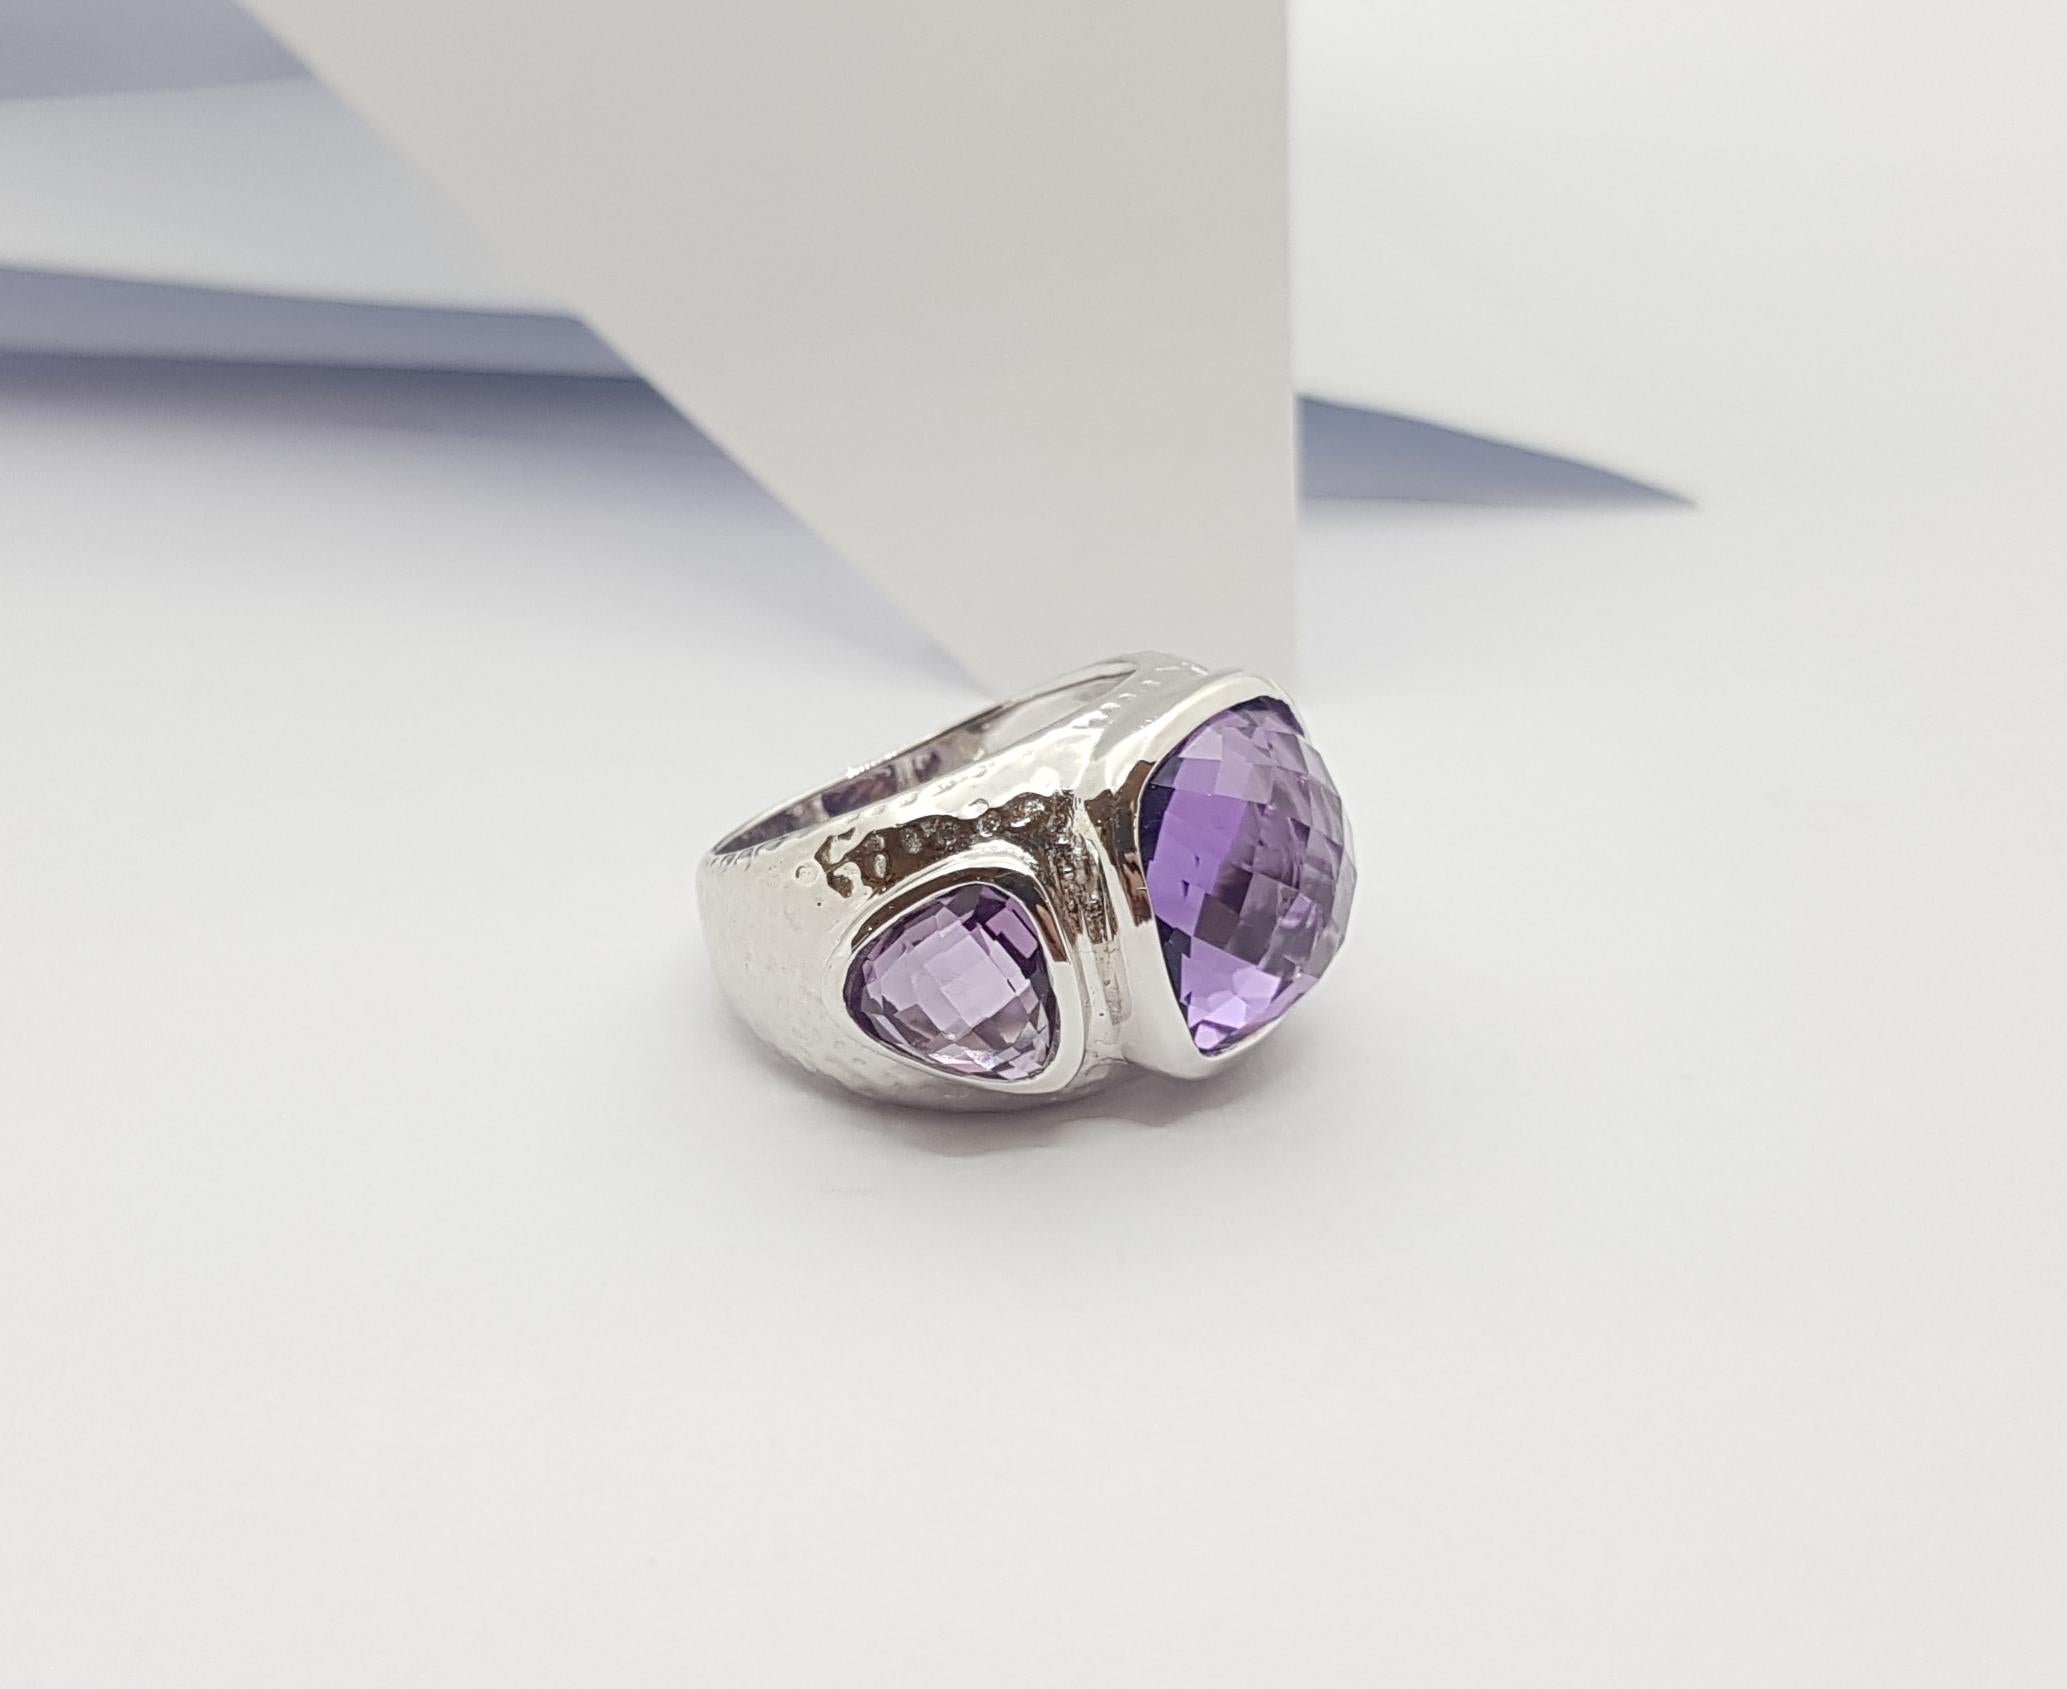 Amethyst 9.09 carat Ring set in Silver Settings

Width:  2.4 cm 
Length: 1.3 cm
Ring Size: 53
Total Weight: 10.45 grams

*Please note that the silver setting is plated with rhodium to promote shine and help prevent oxidation.  However, with the